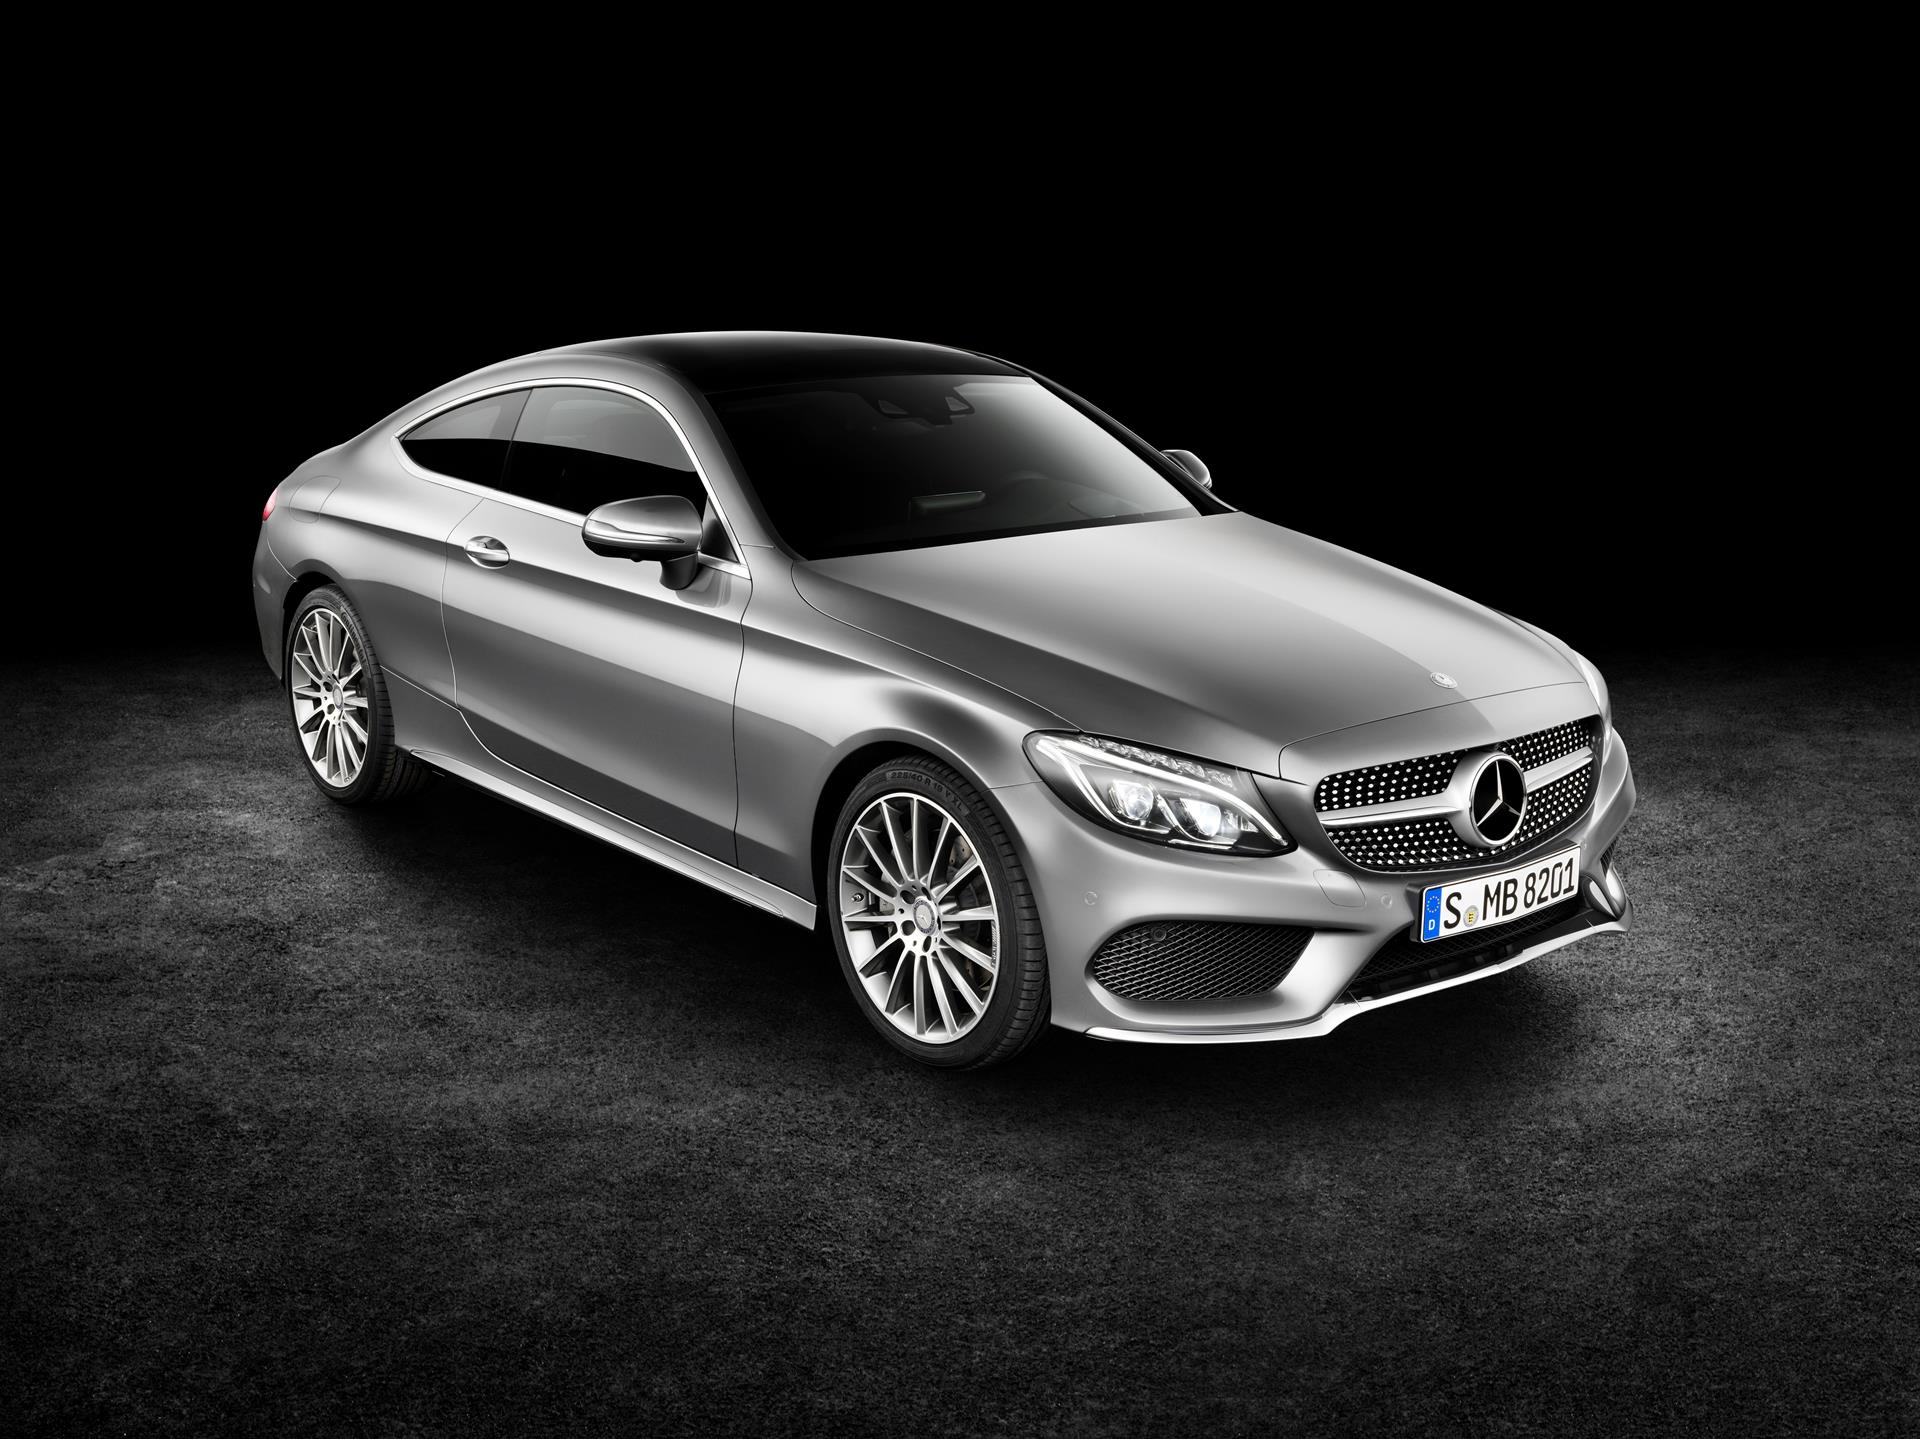 Mercedes C300 Pictures Wallpapers